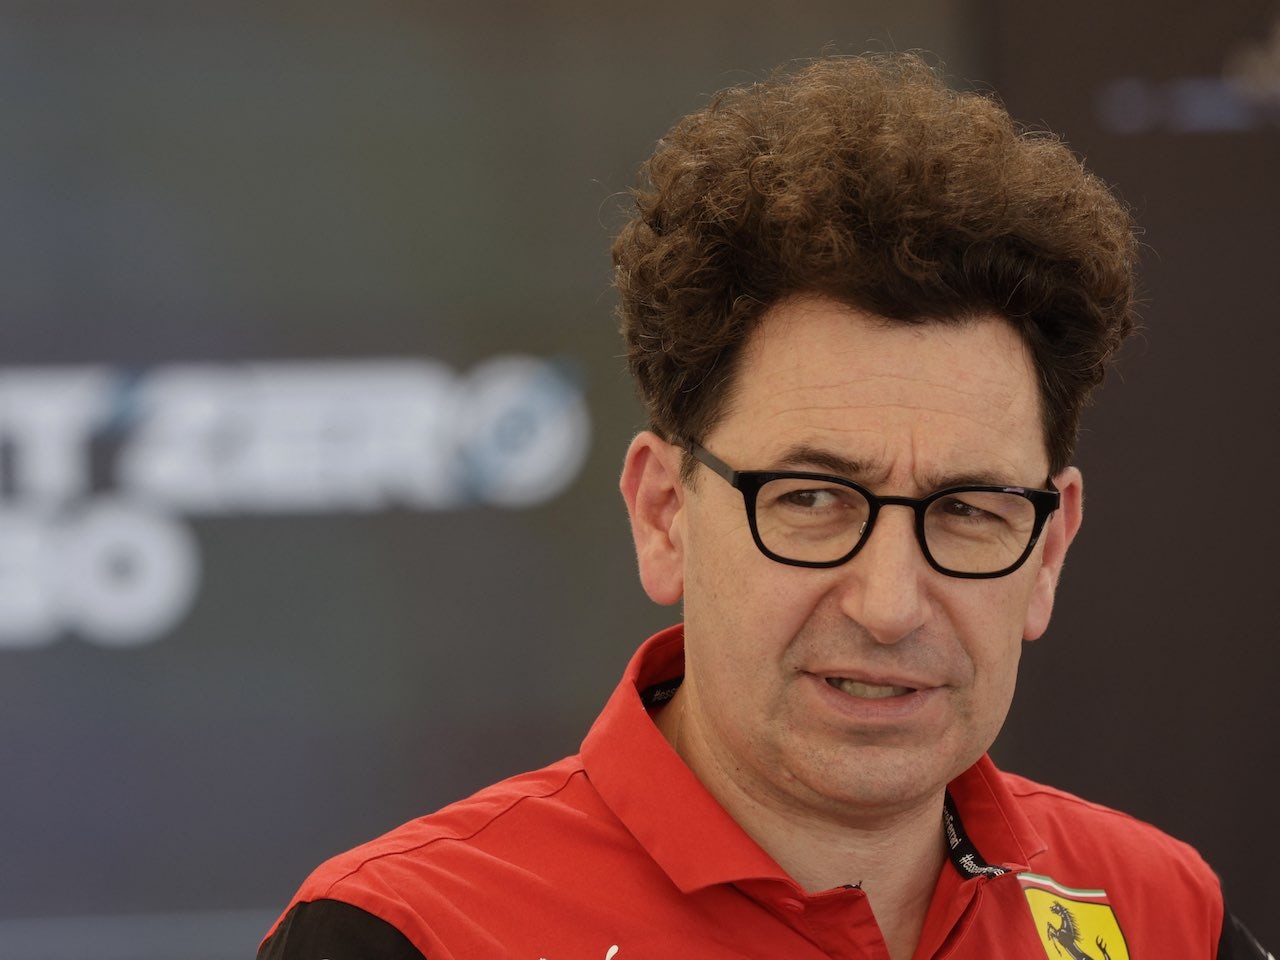 Binotto linked with Audi or Mercedes move